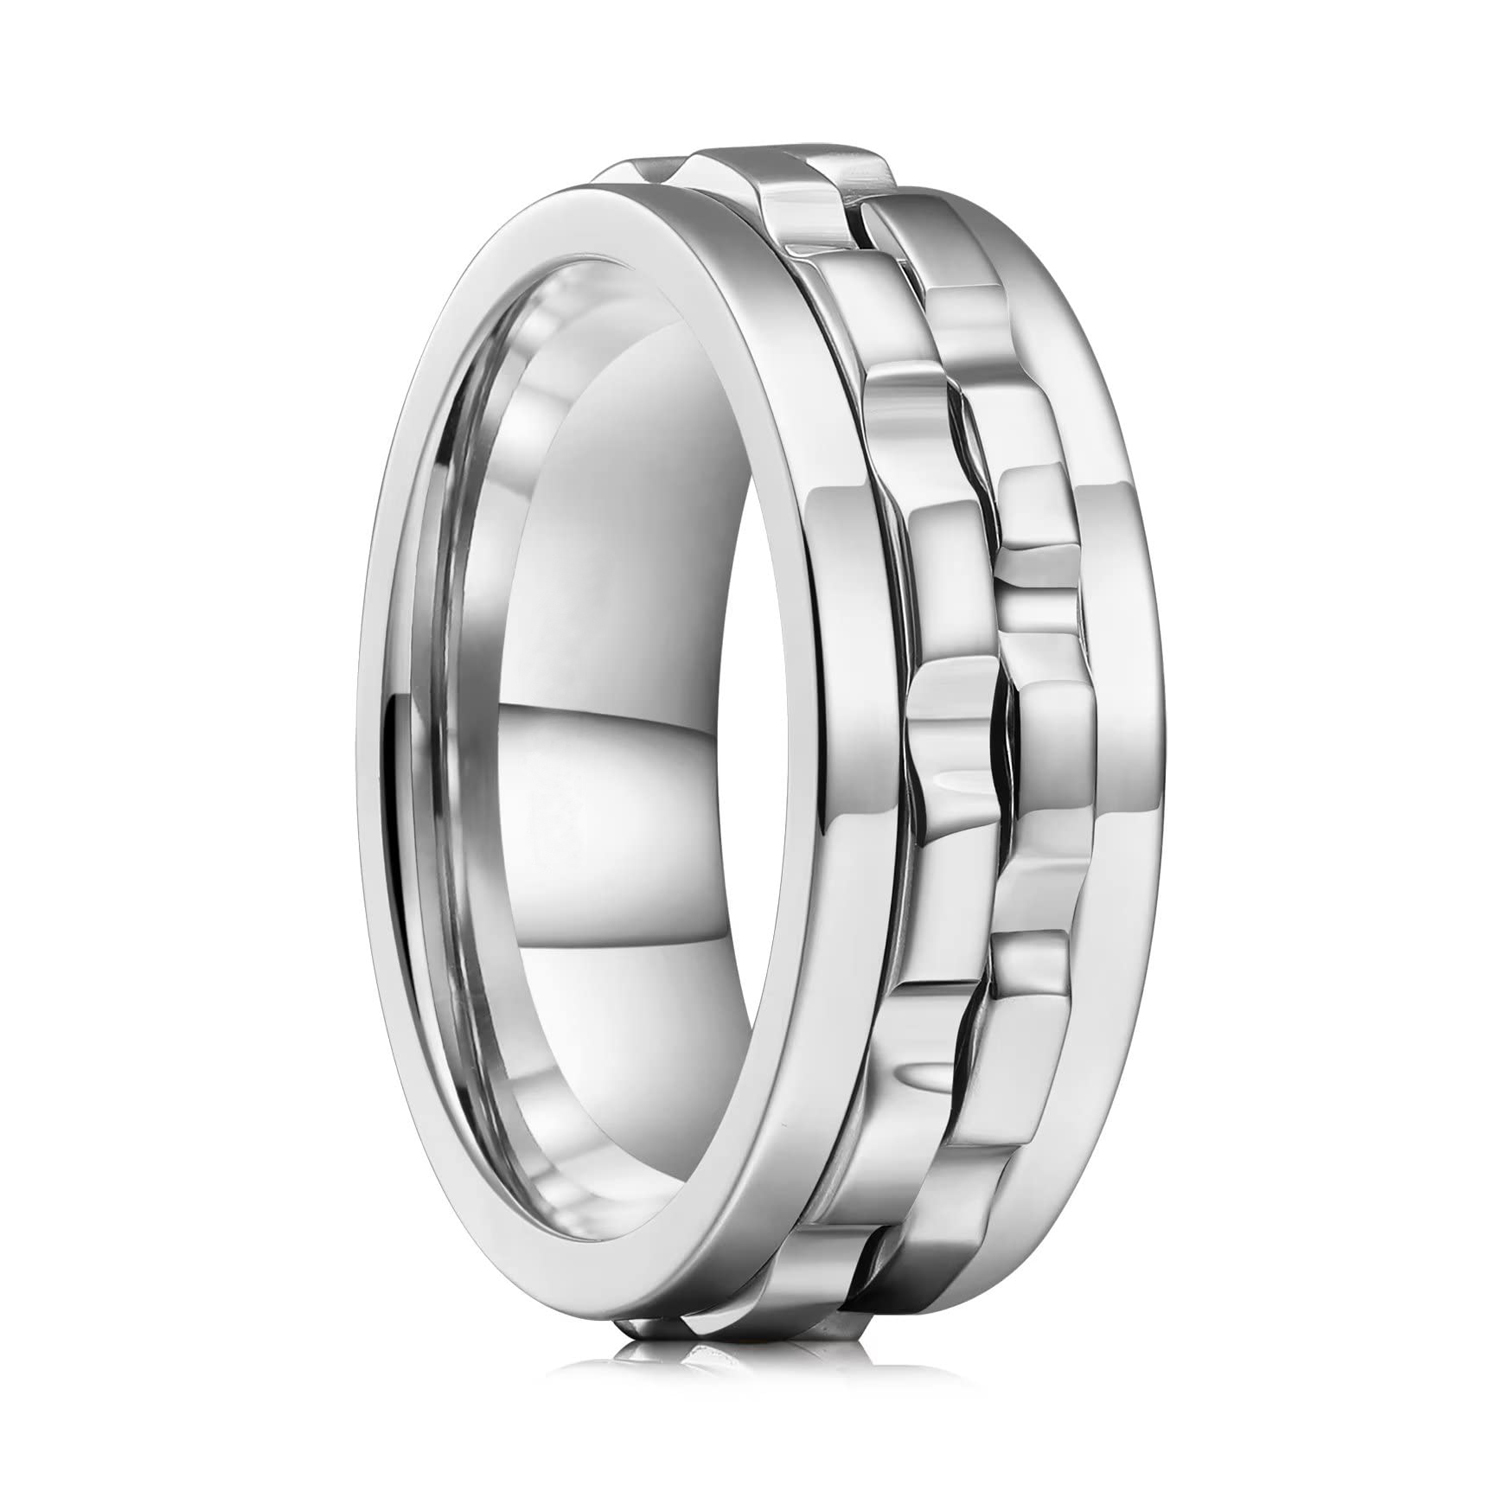 New Titanium Steel Punk Defense Ring Multi Functional Rings For Men And  Women Stress Relief Spinner Rings Self-help Ring Gift - AliExpress